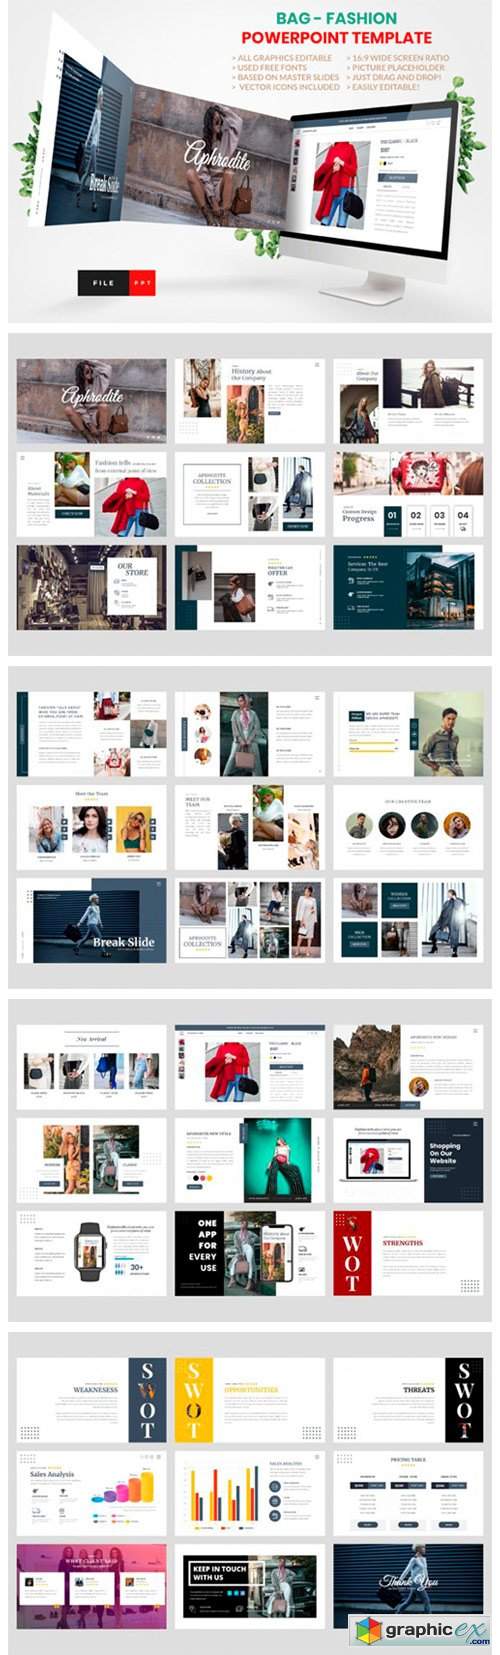 Bag Fashion PowerPoint Template